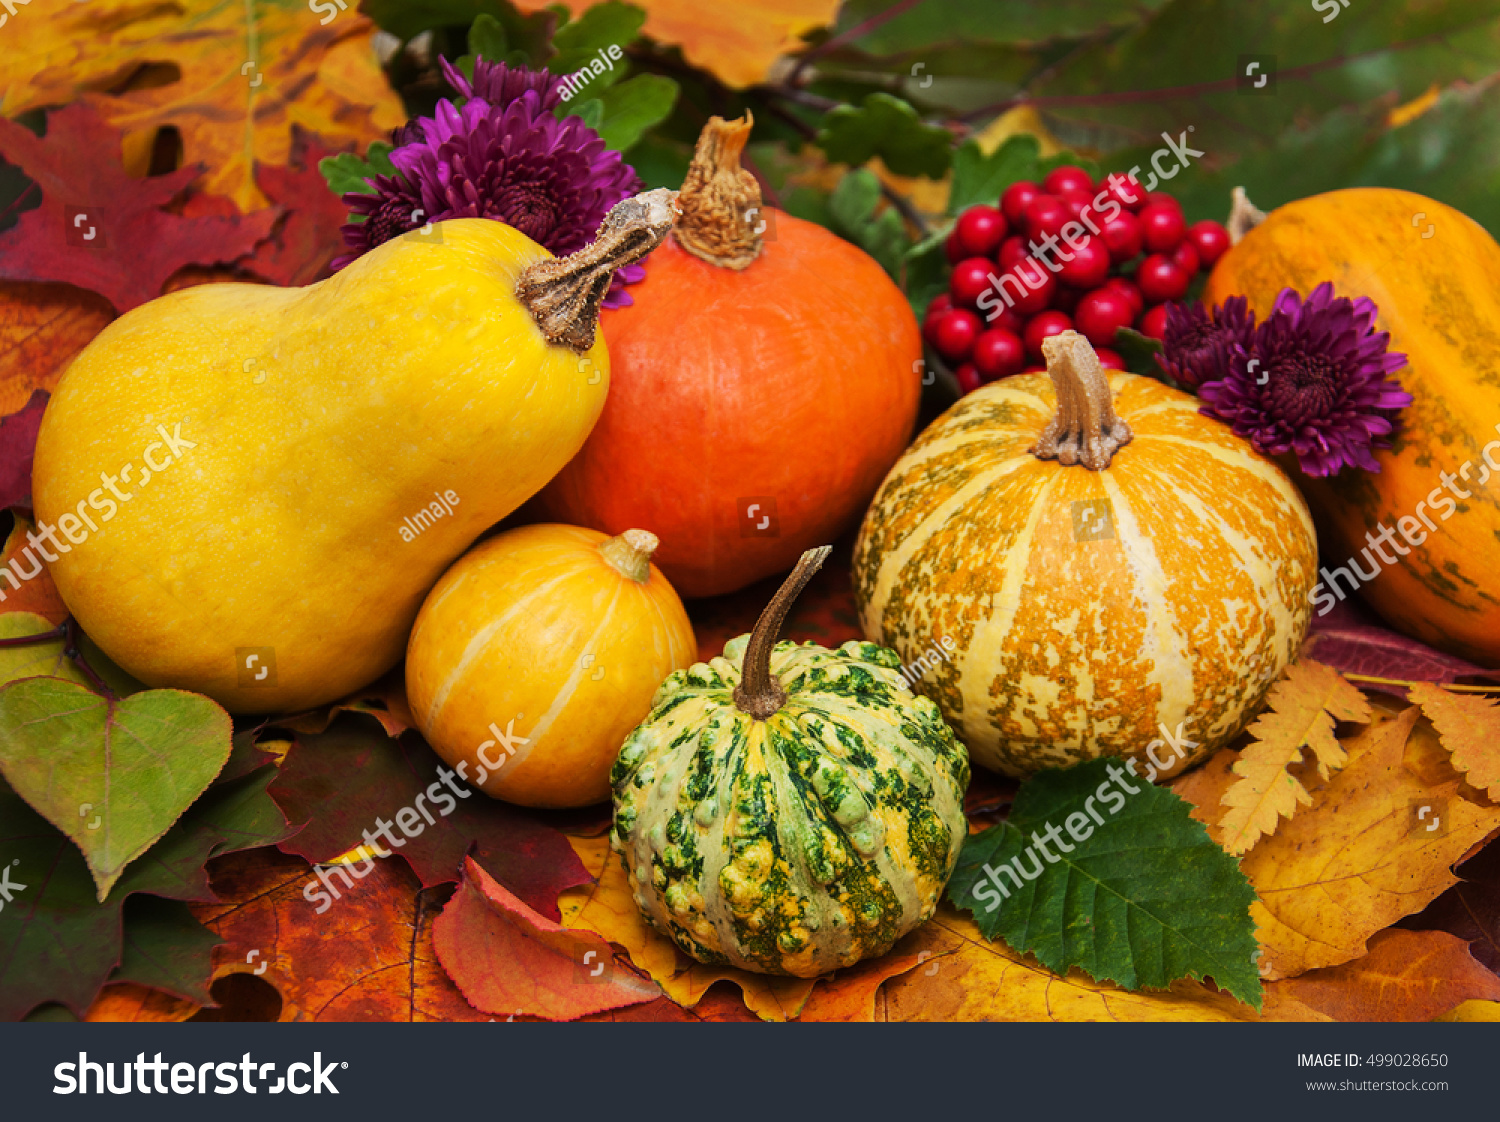 Pumpkins on the background with  autumn  leaves  #499028650